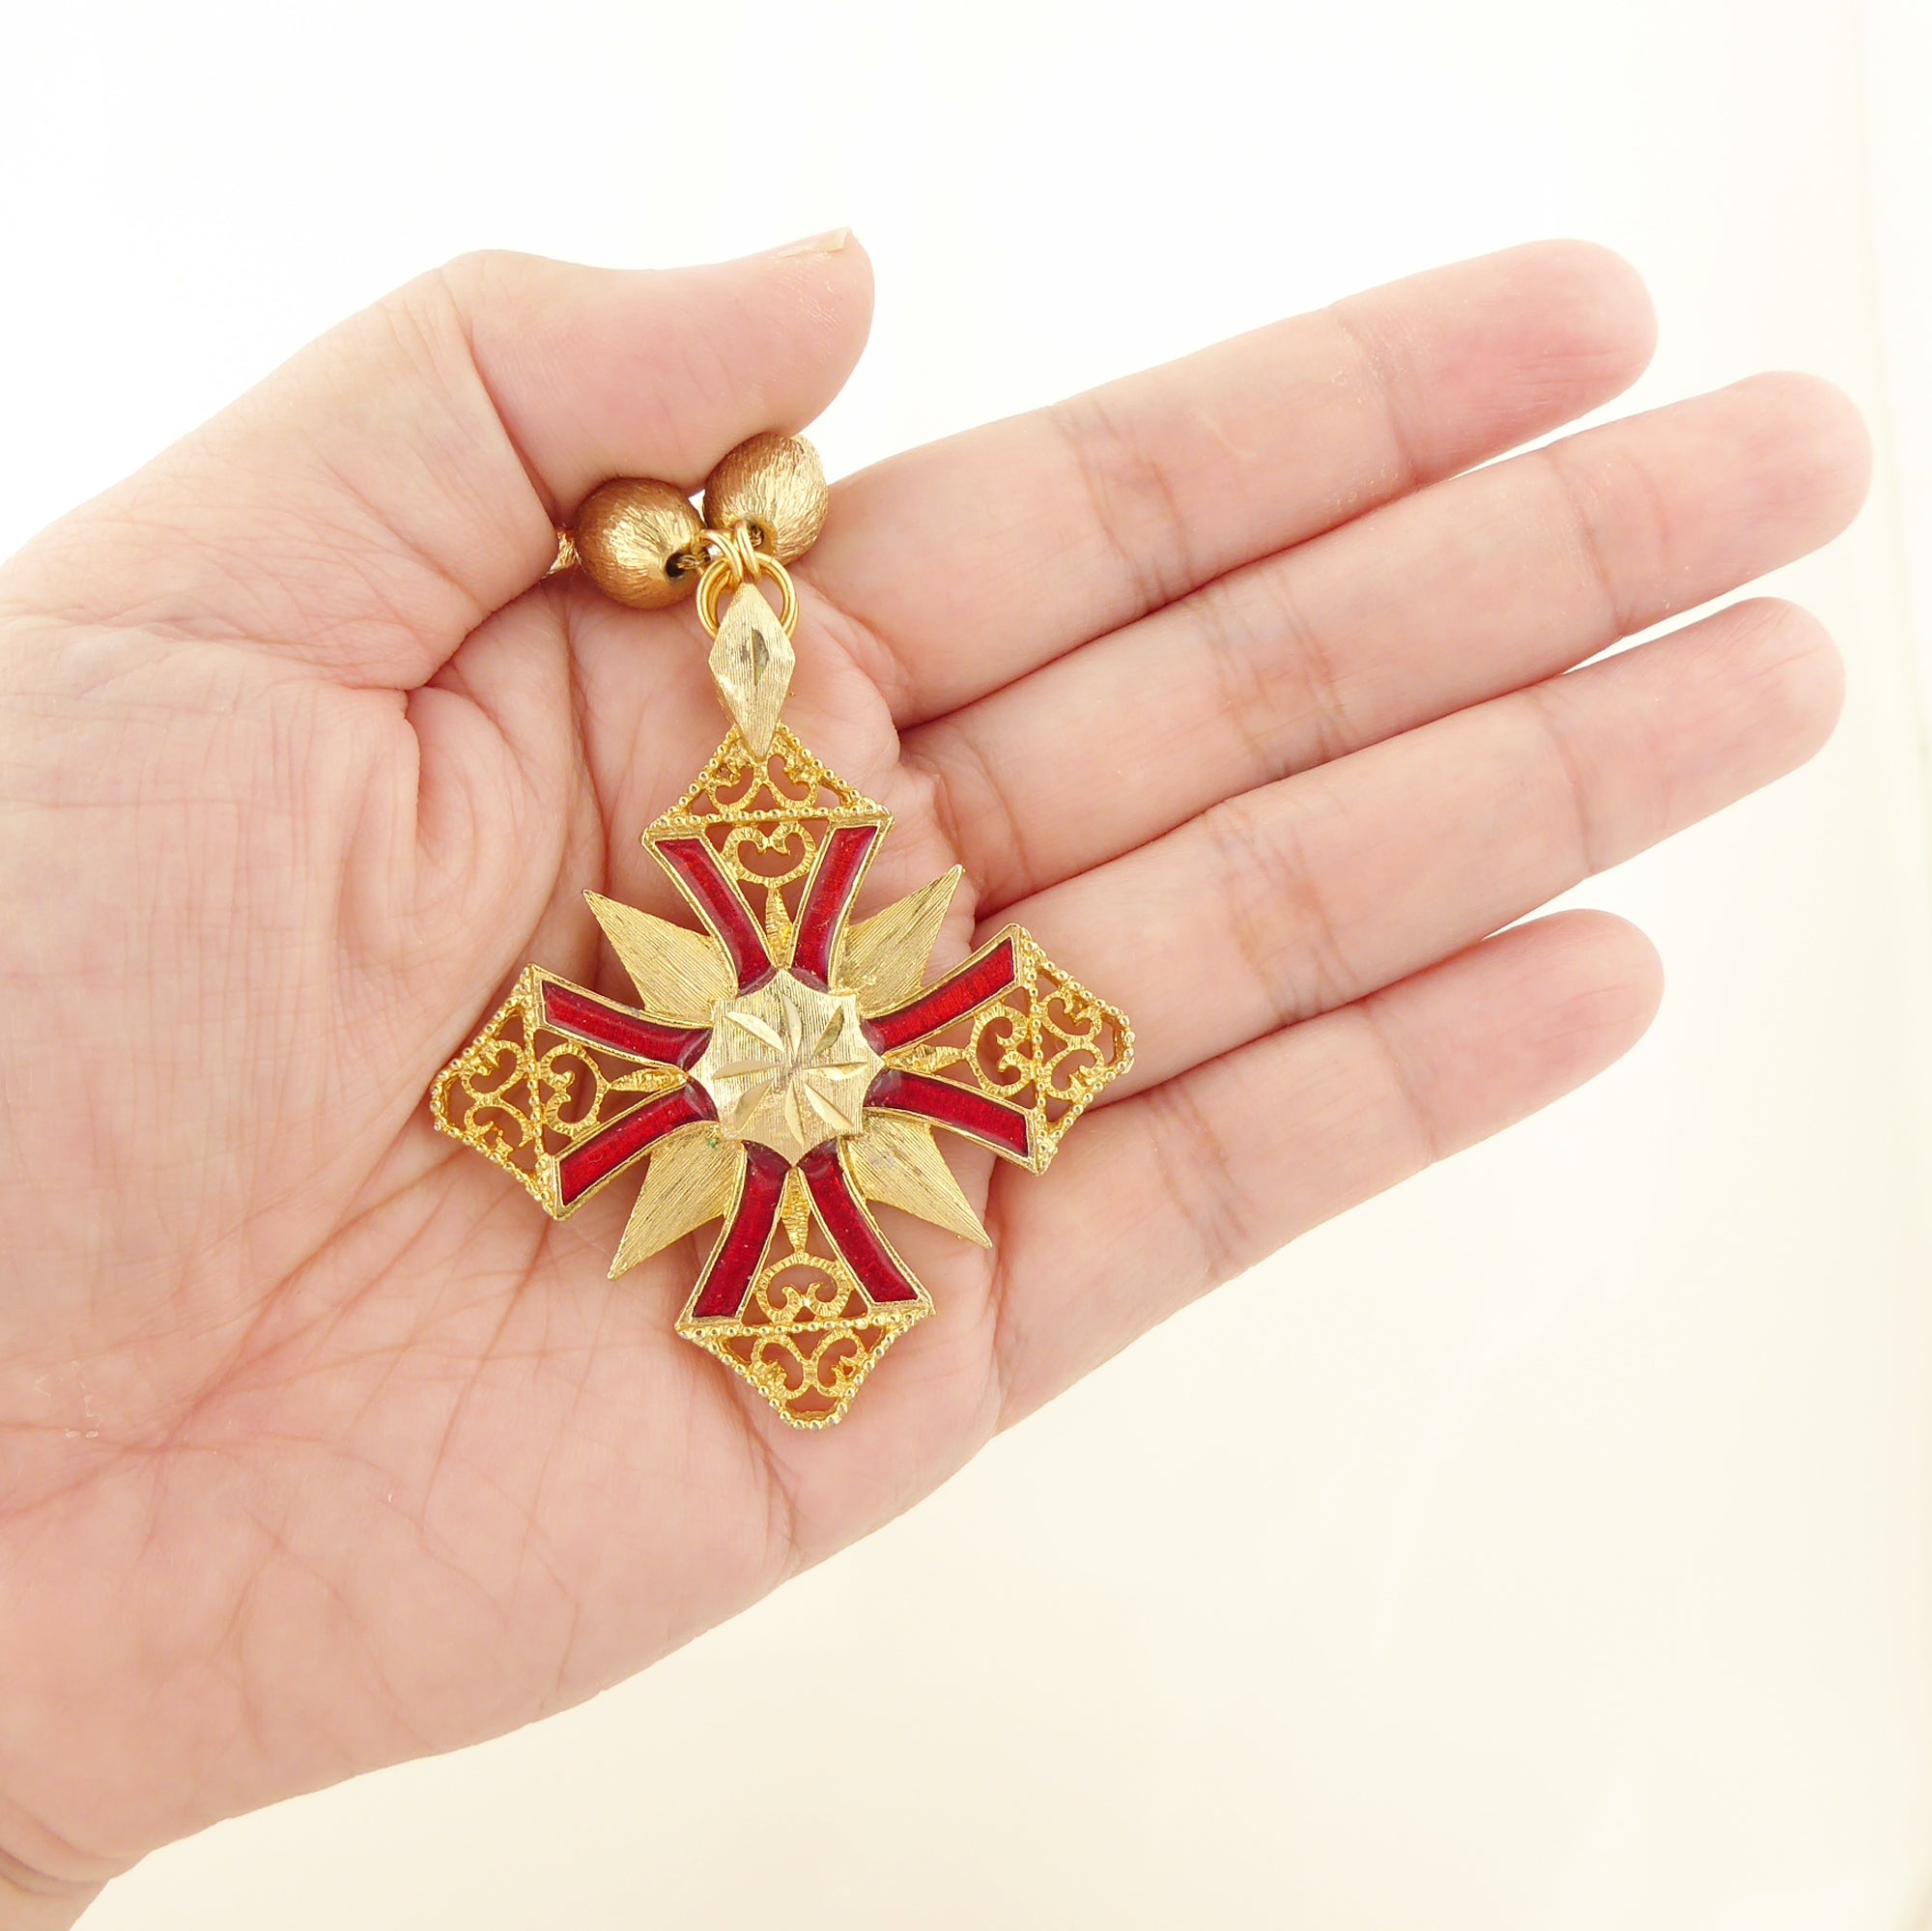 Red medieval cross necklace by Jenny Dayco 5